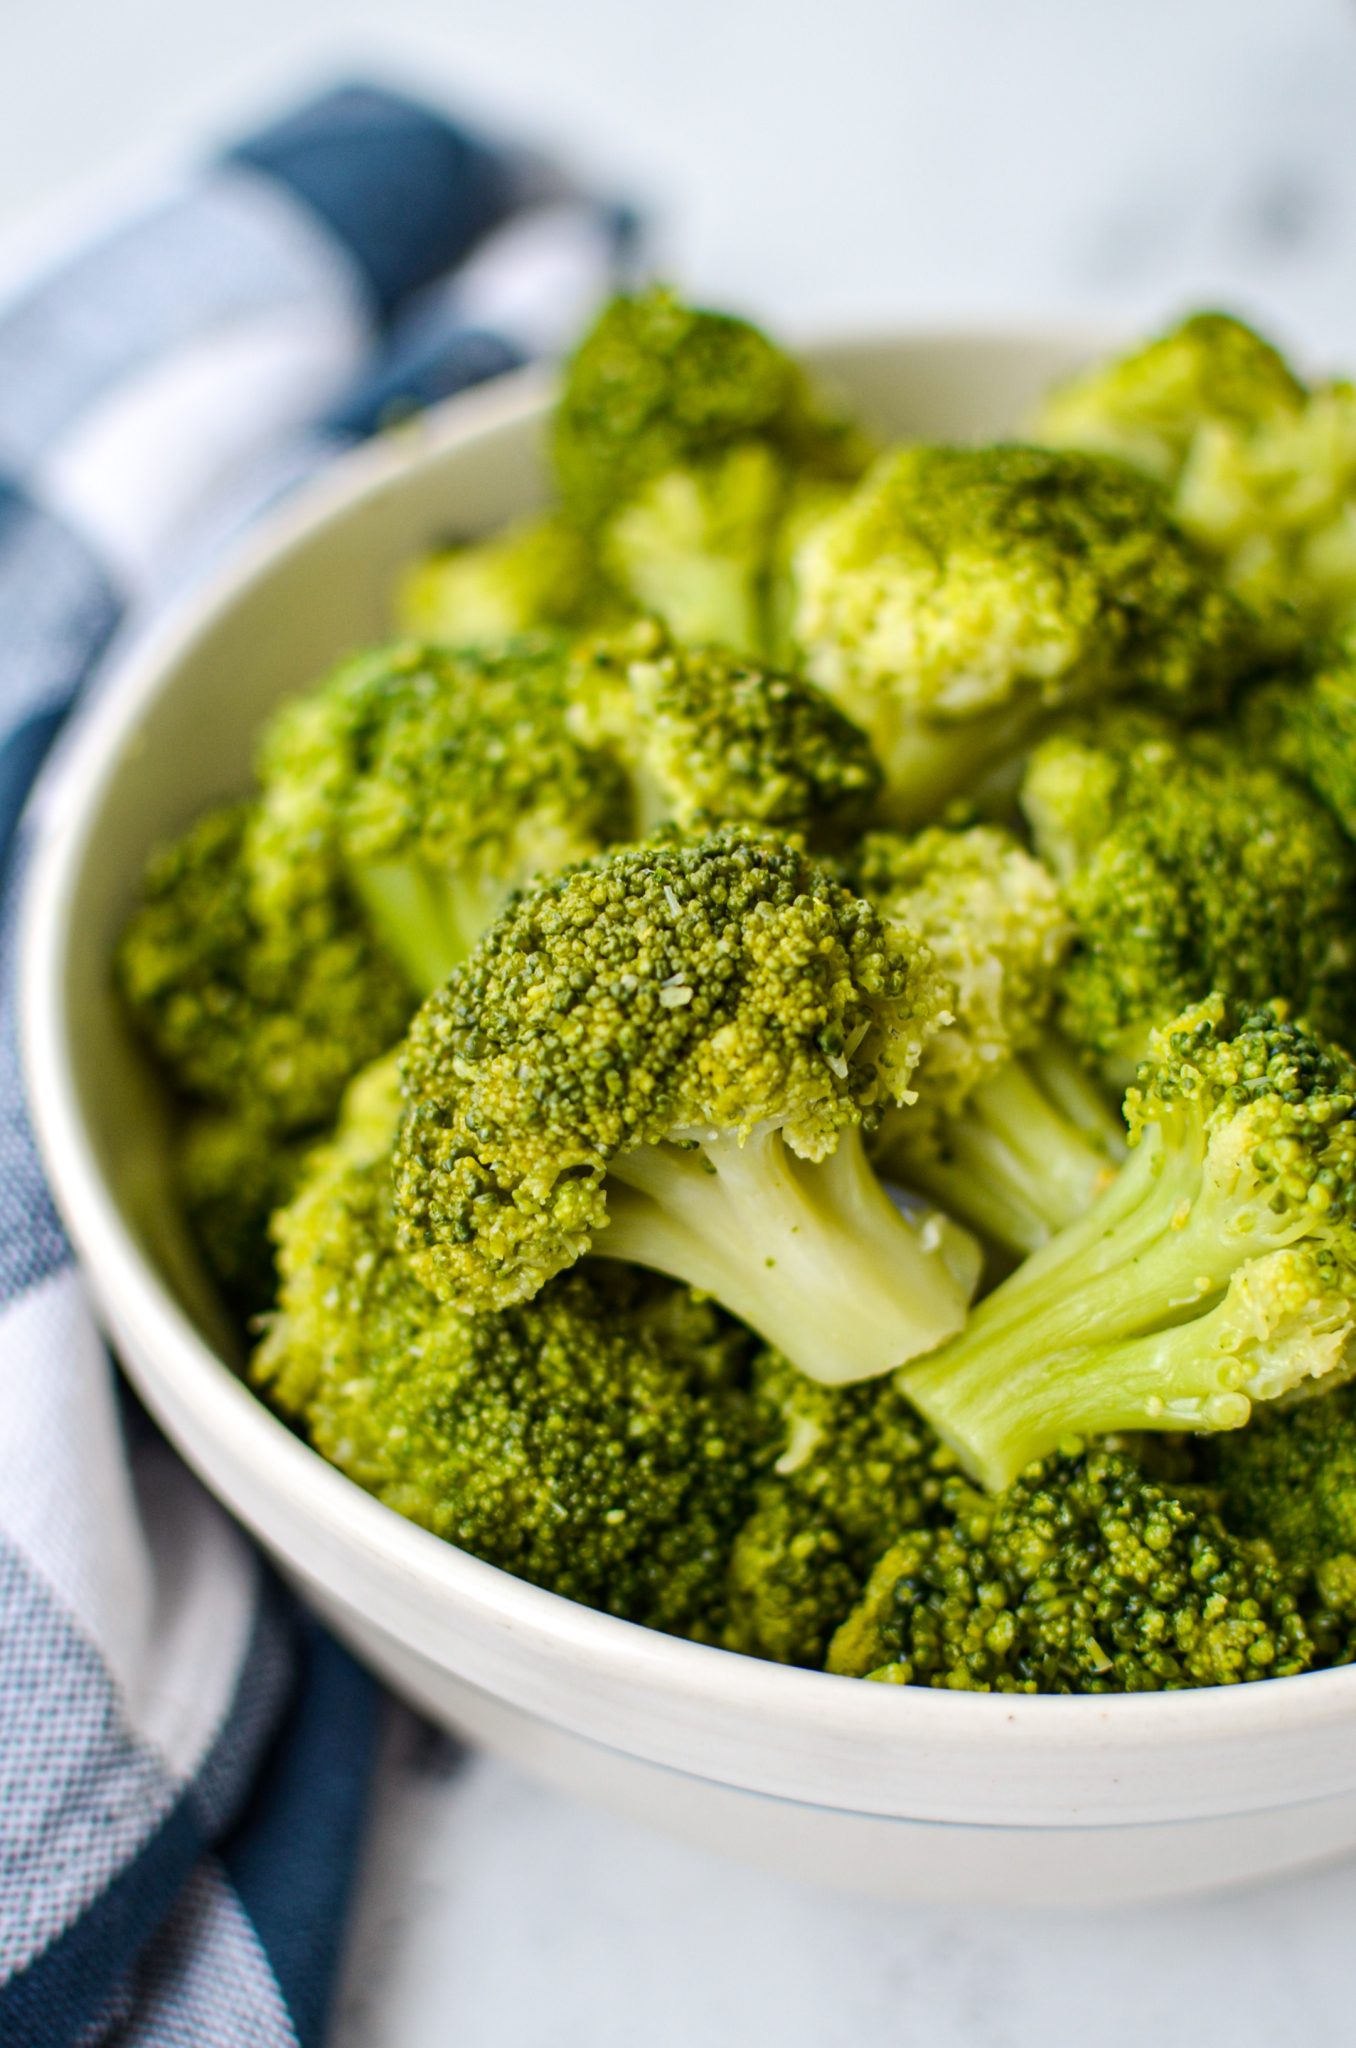 A bowl of cooked broccoli, resting on a blue check napkin.